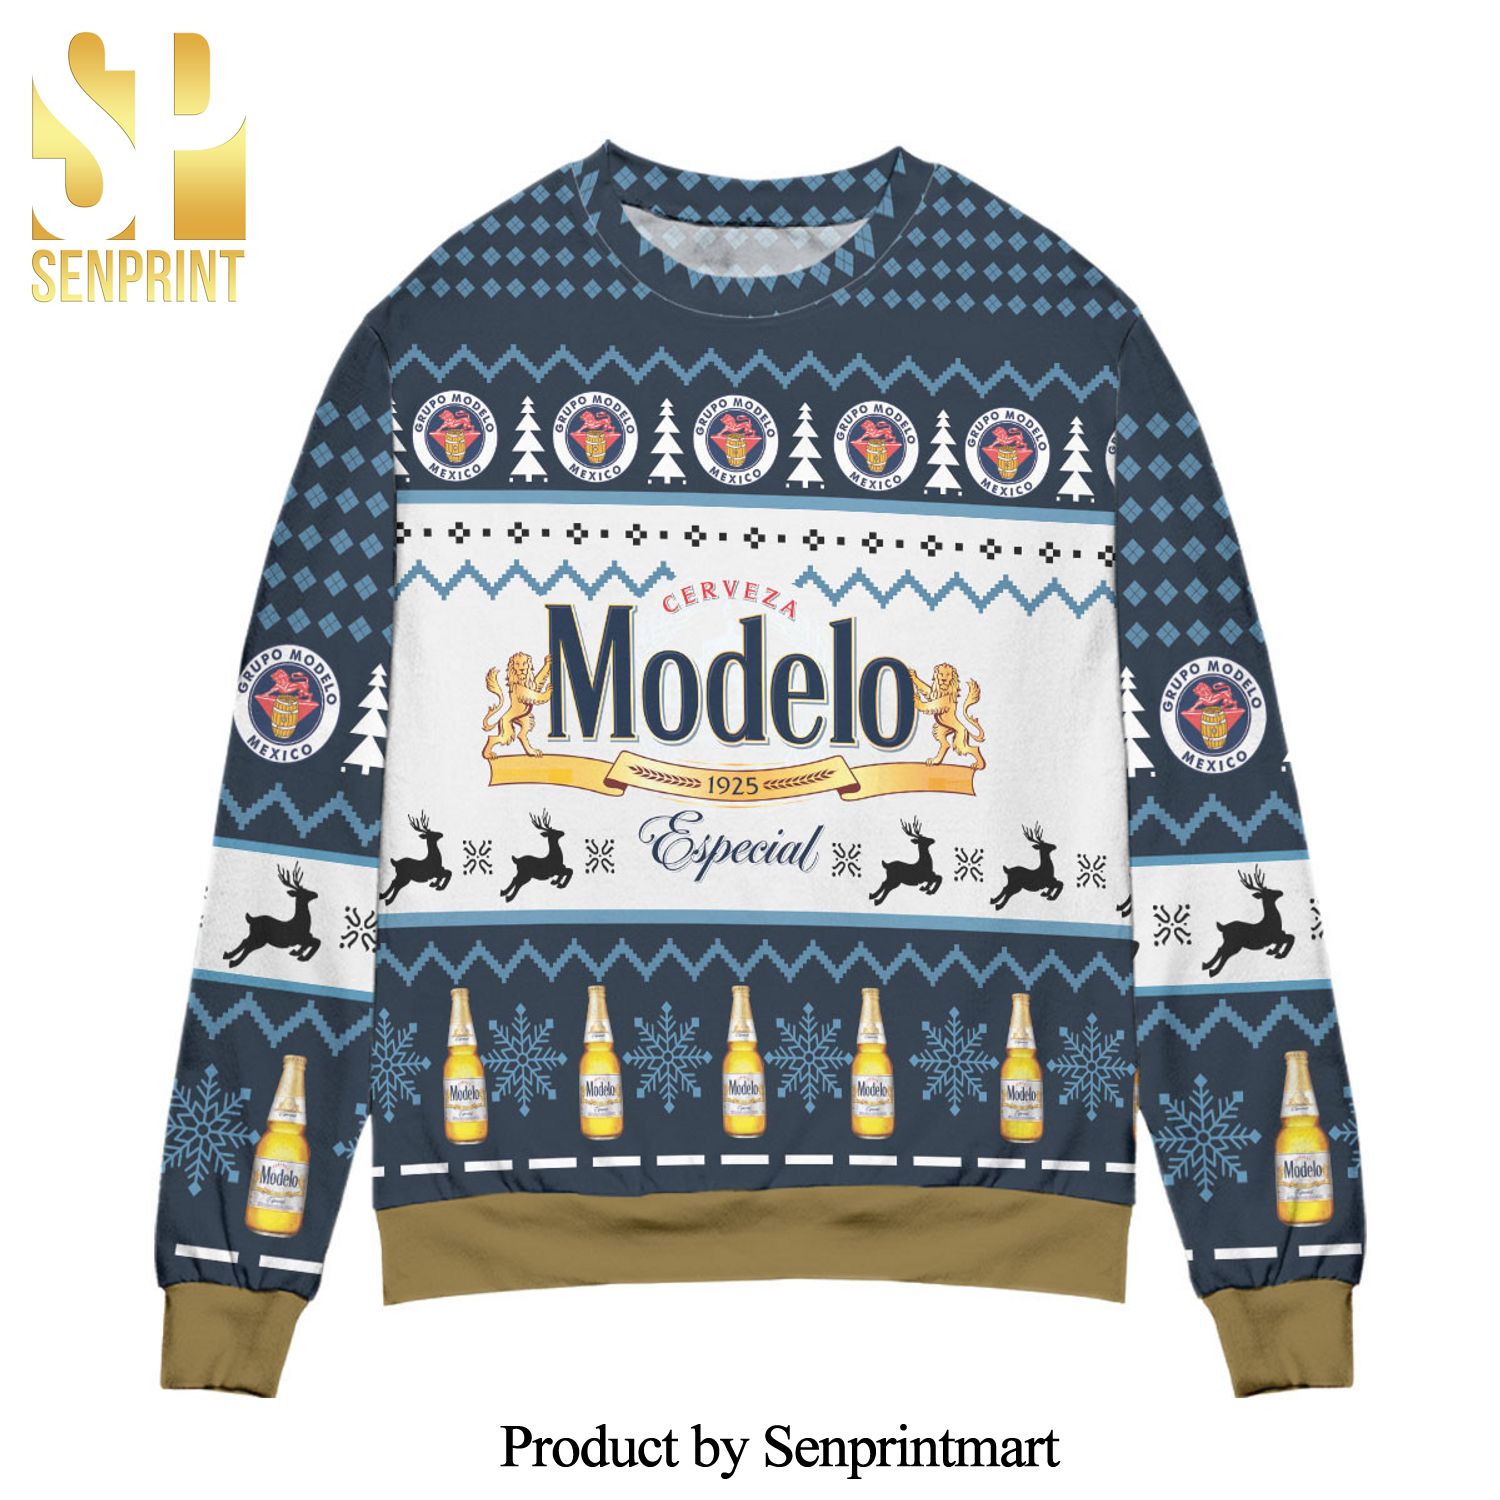 Cerveza Modelo Since 1925 Reindeer Pattern Knitted Ugly Christmas Sweater – White Blue